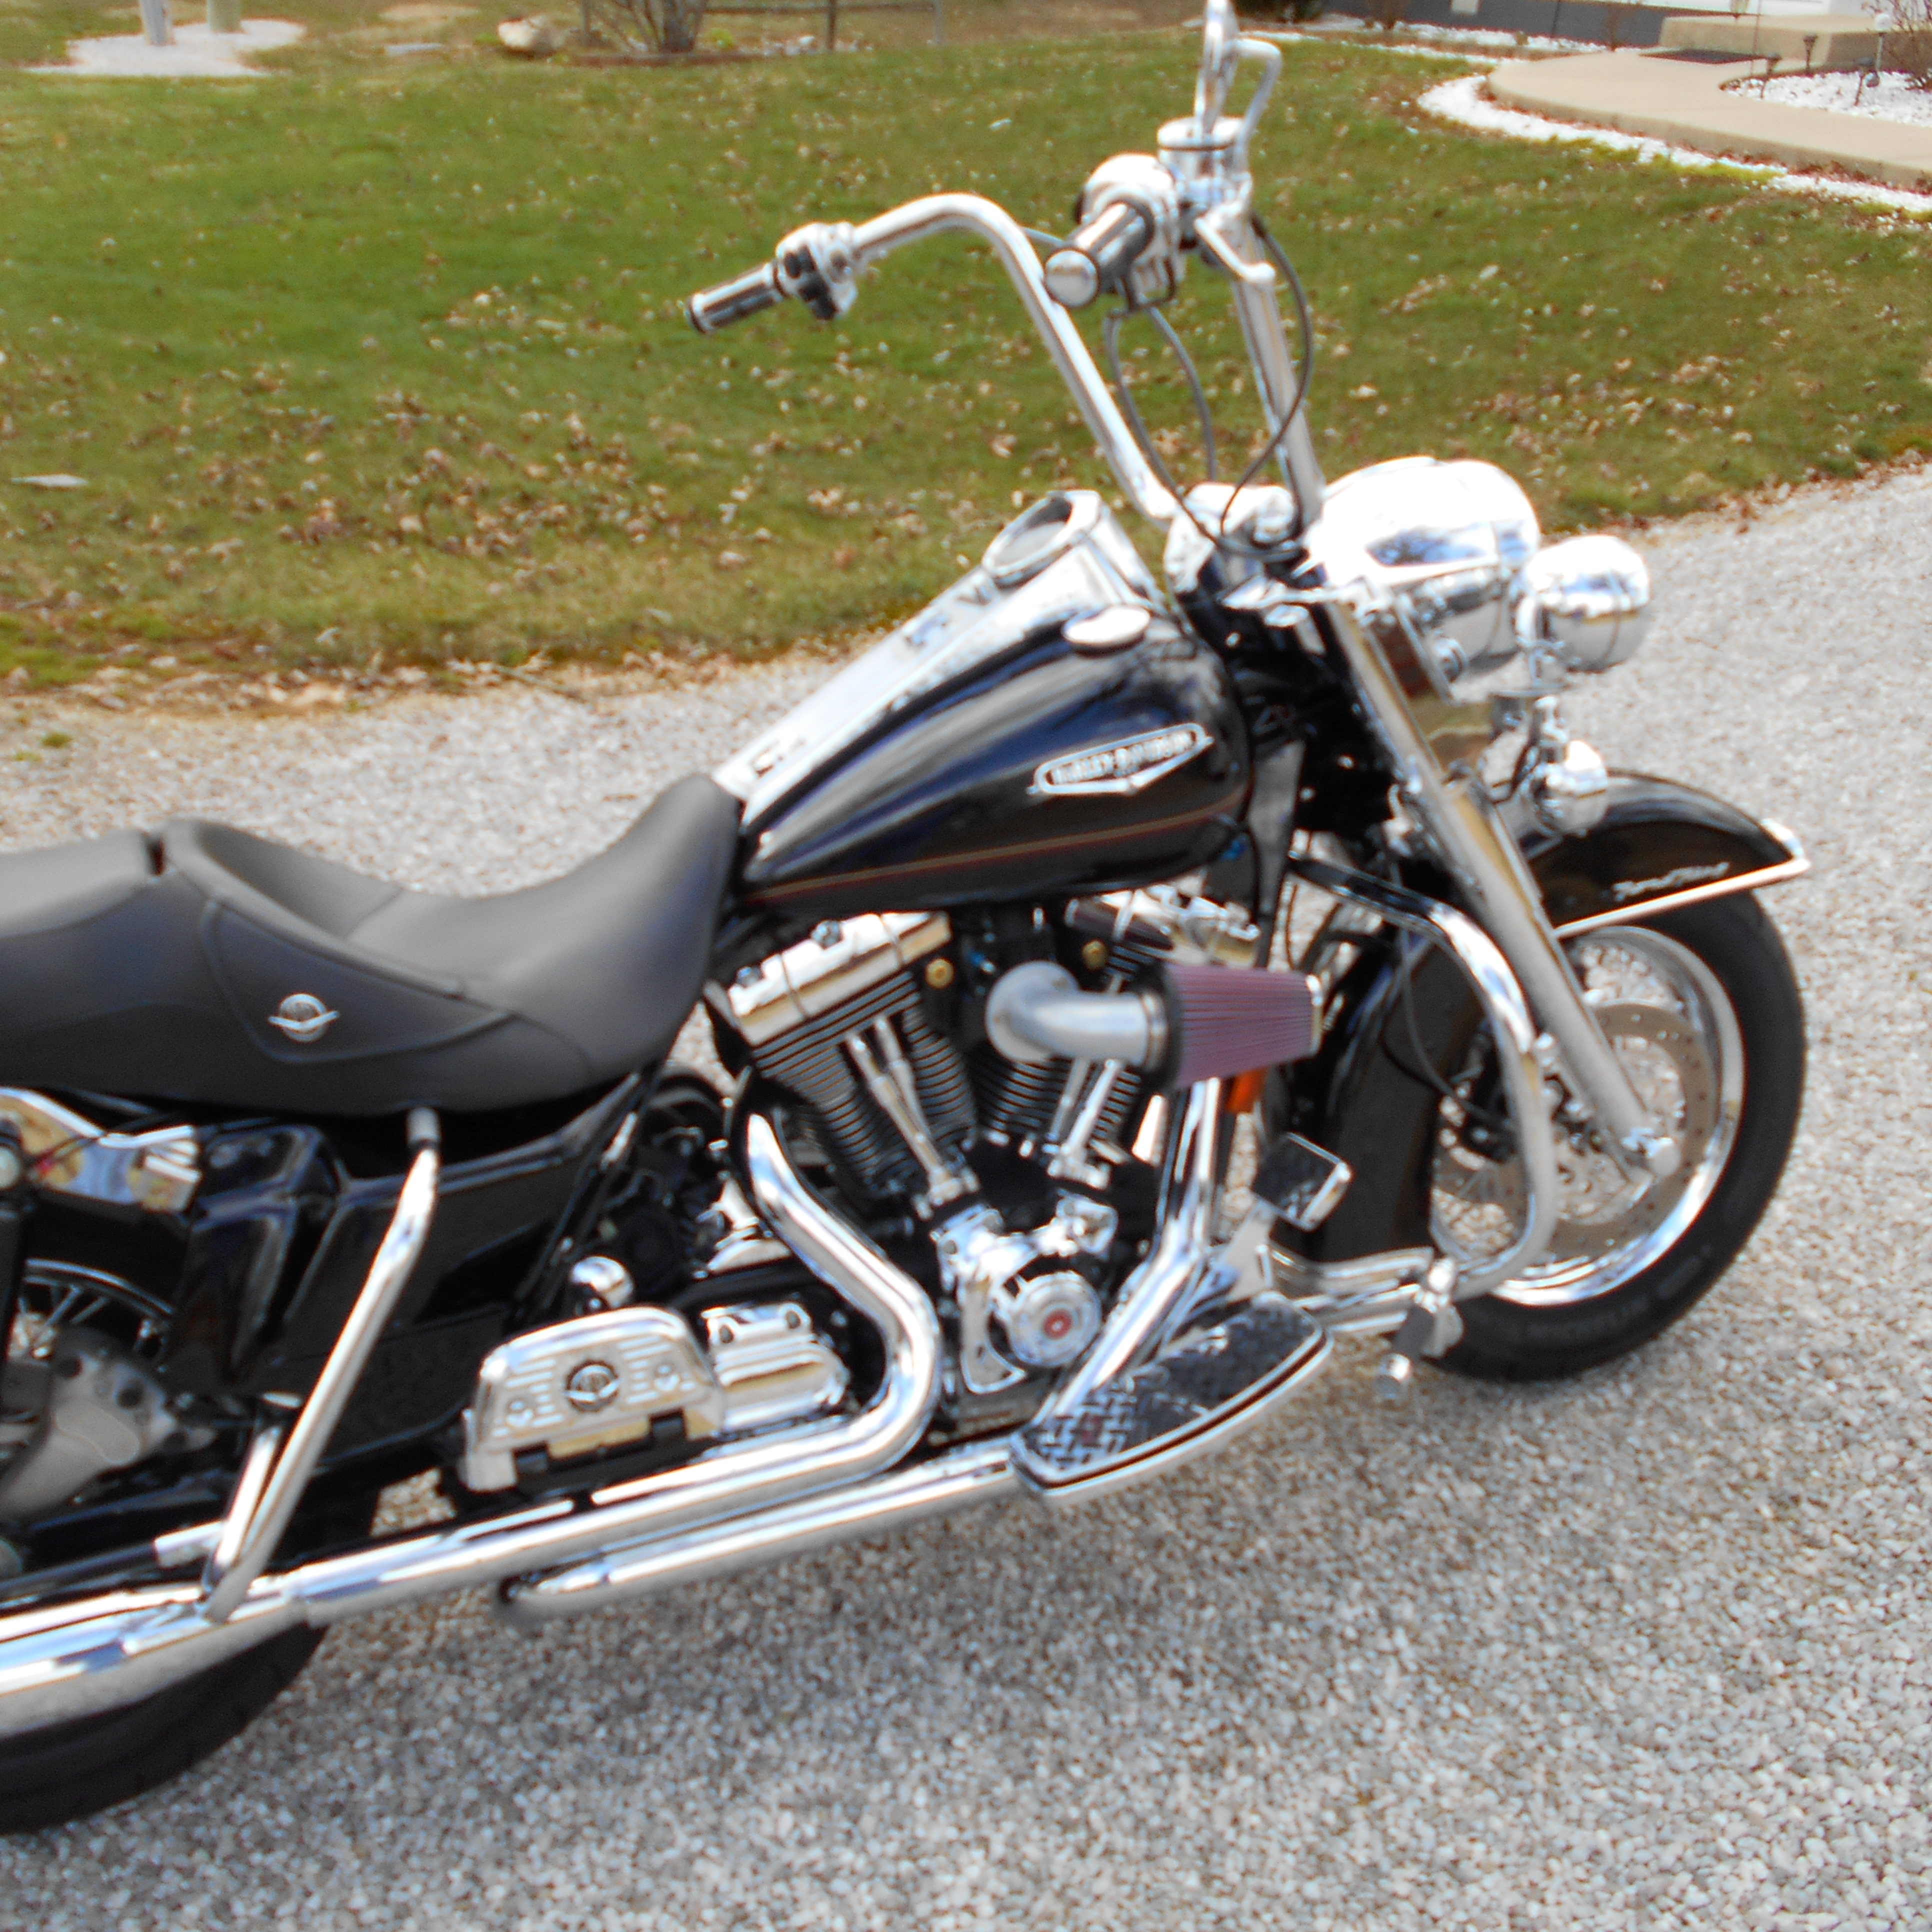 08 Road King Classic installing Burly Beach Bars - Page 2 - Harley ...